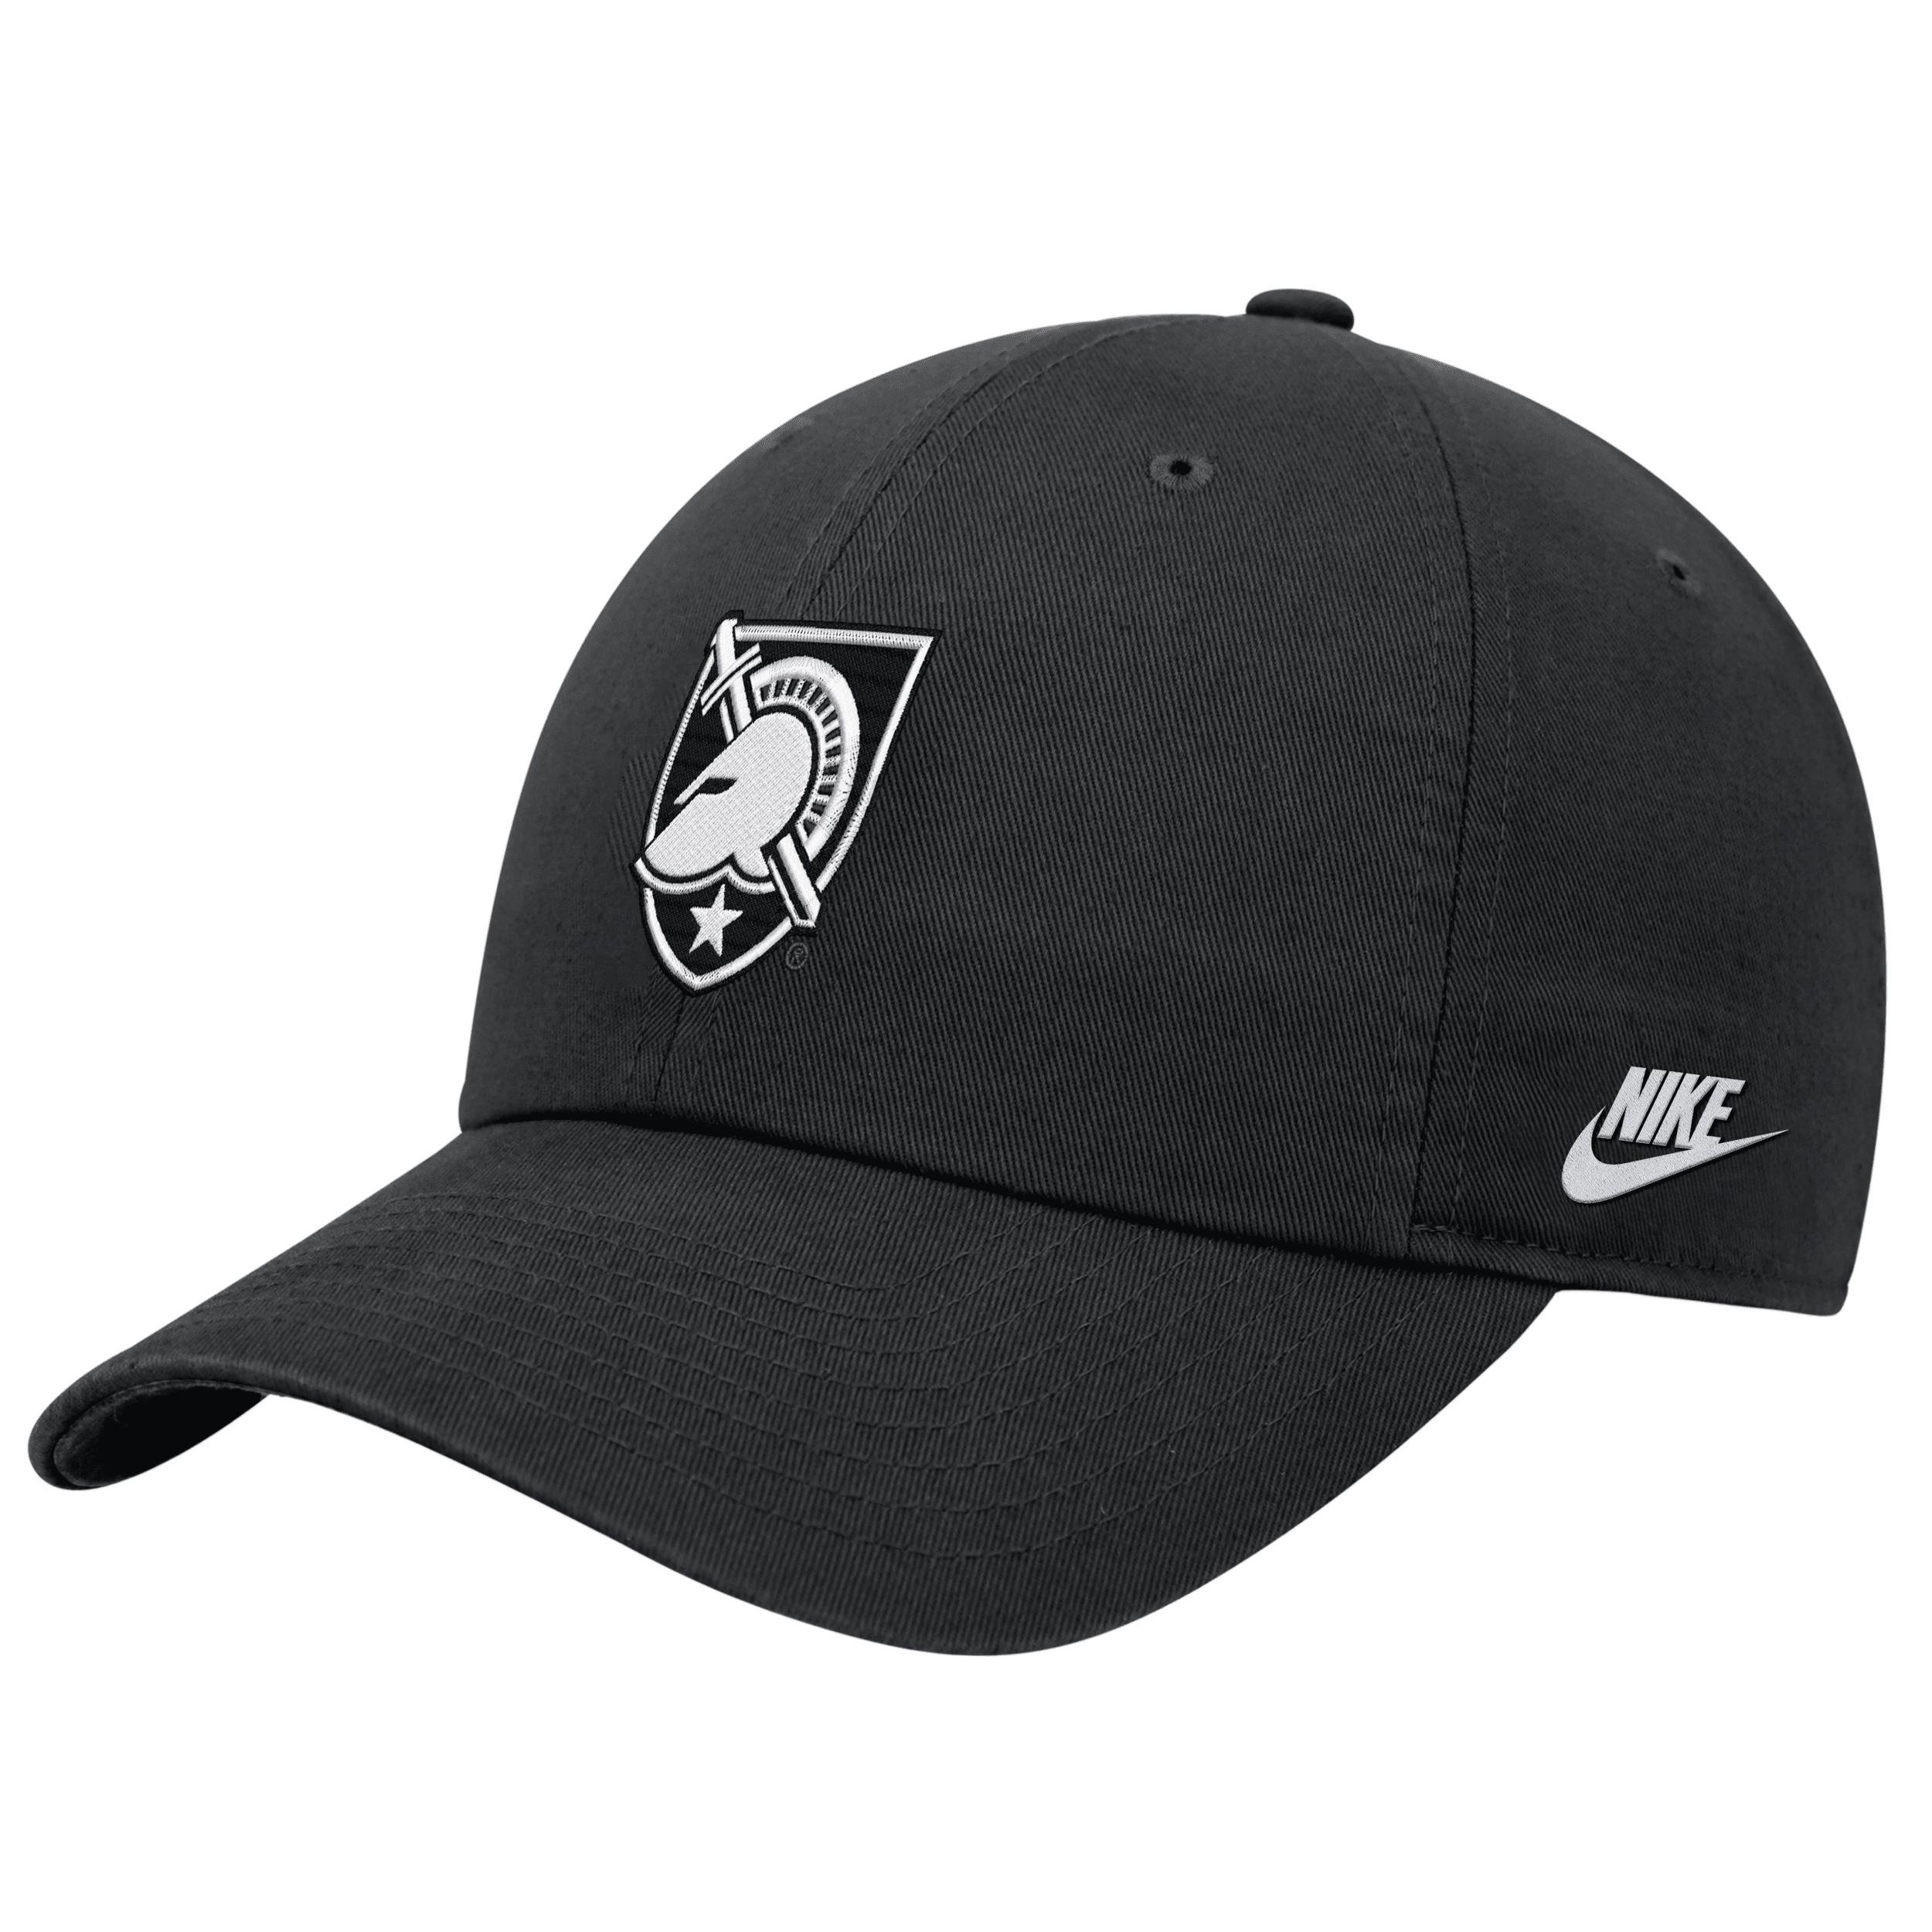 Army Nike Unisex College Cap by NIKE